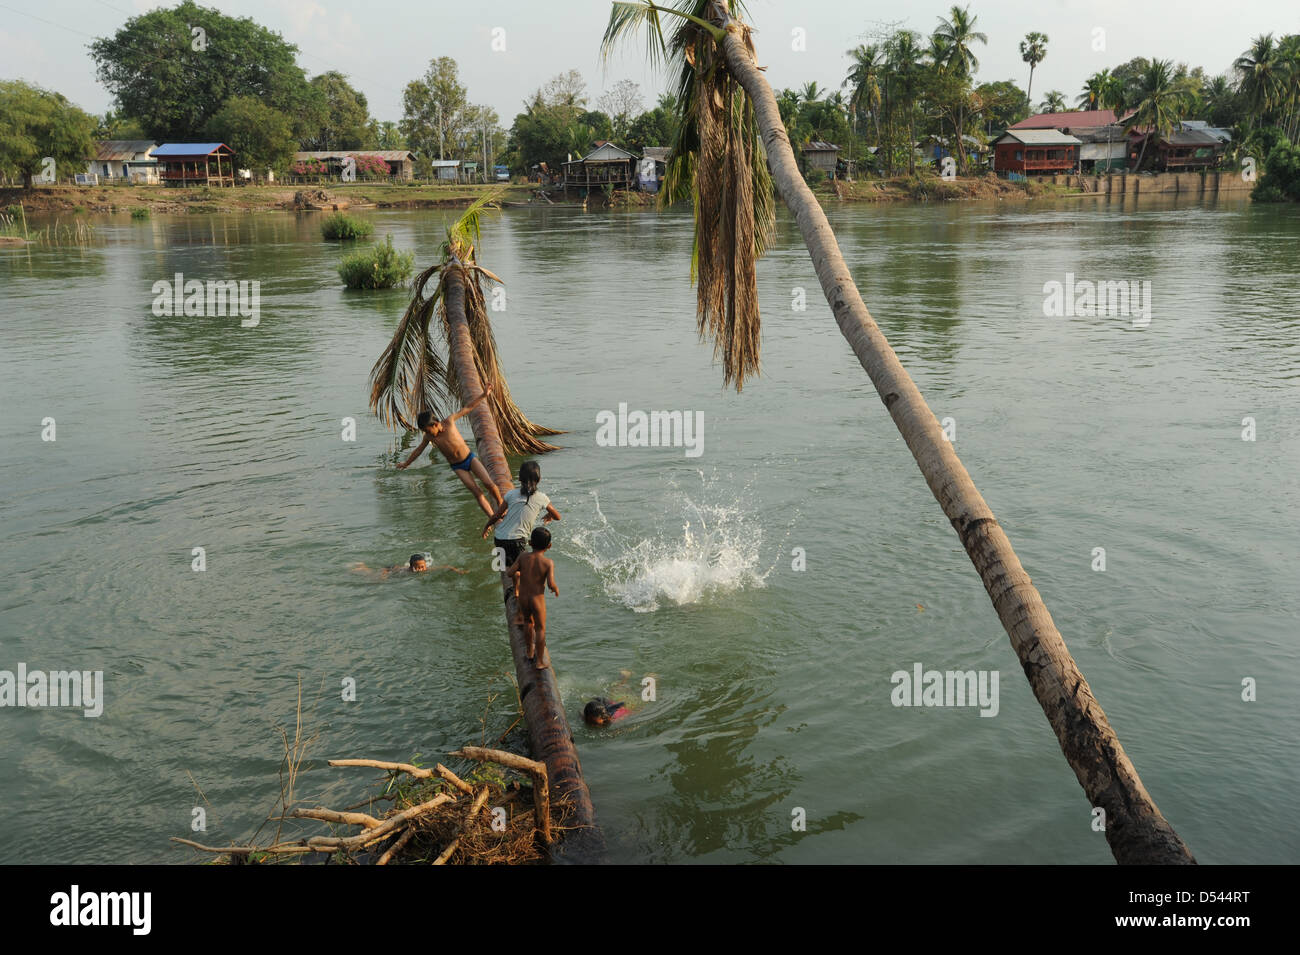 Children playing on river Mekong at Don Khon island on Laos Stock Photo